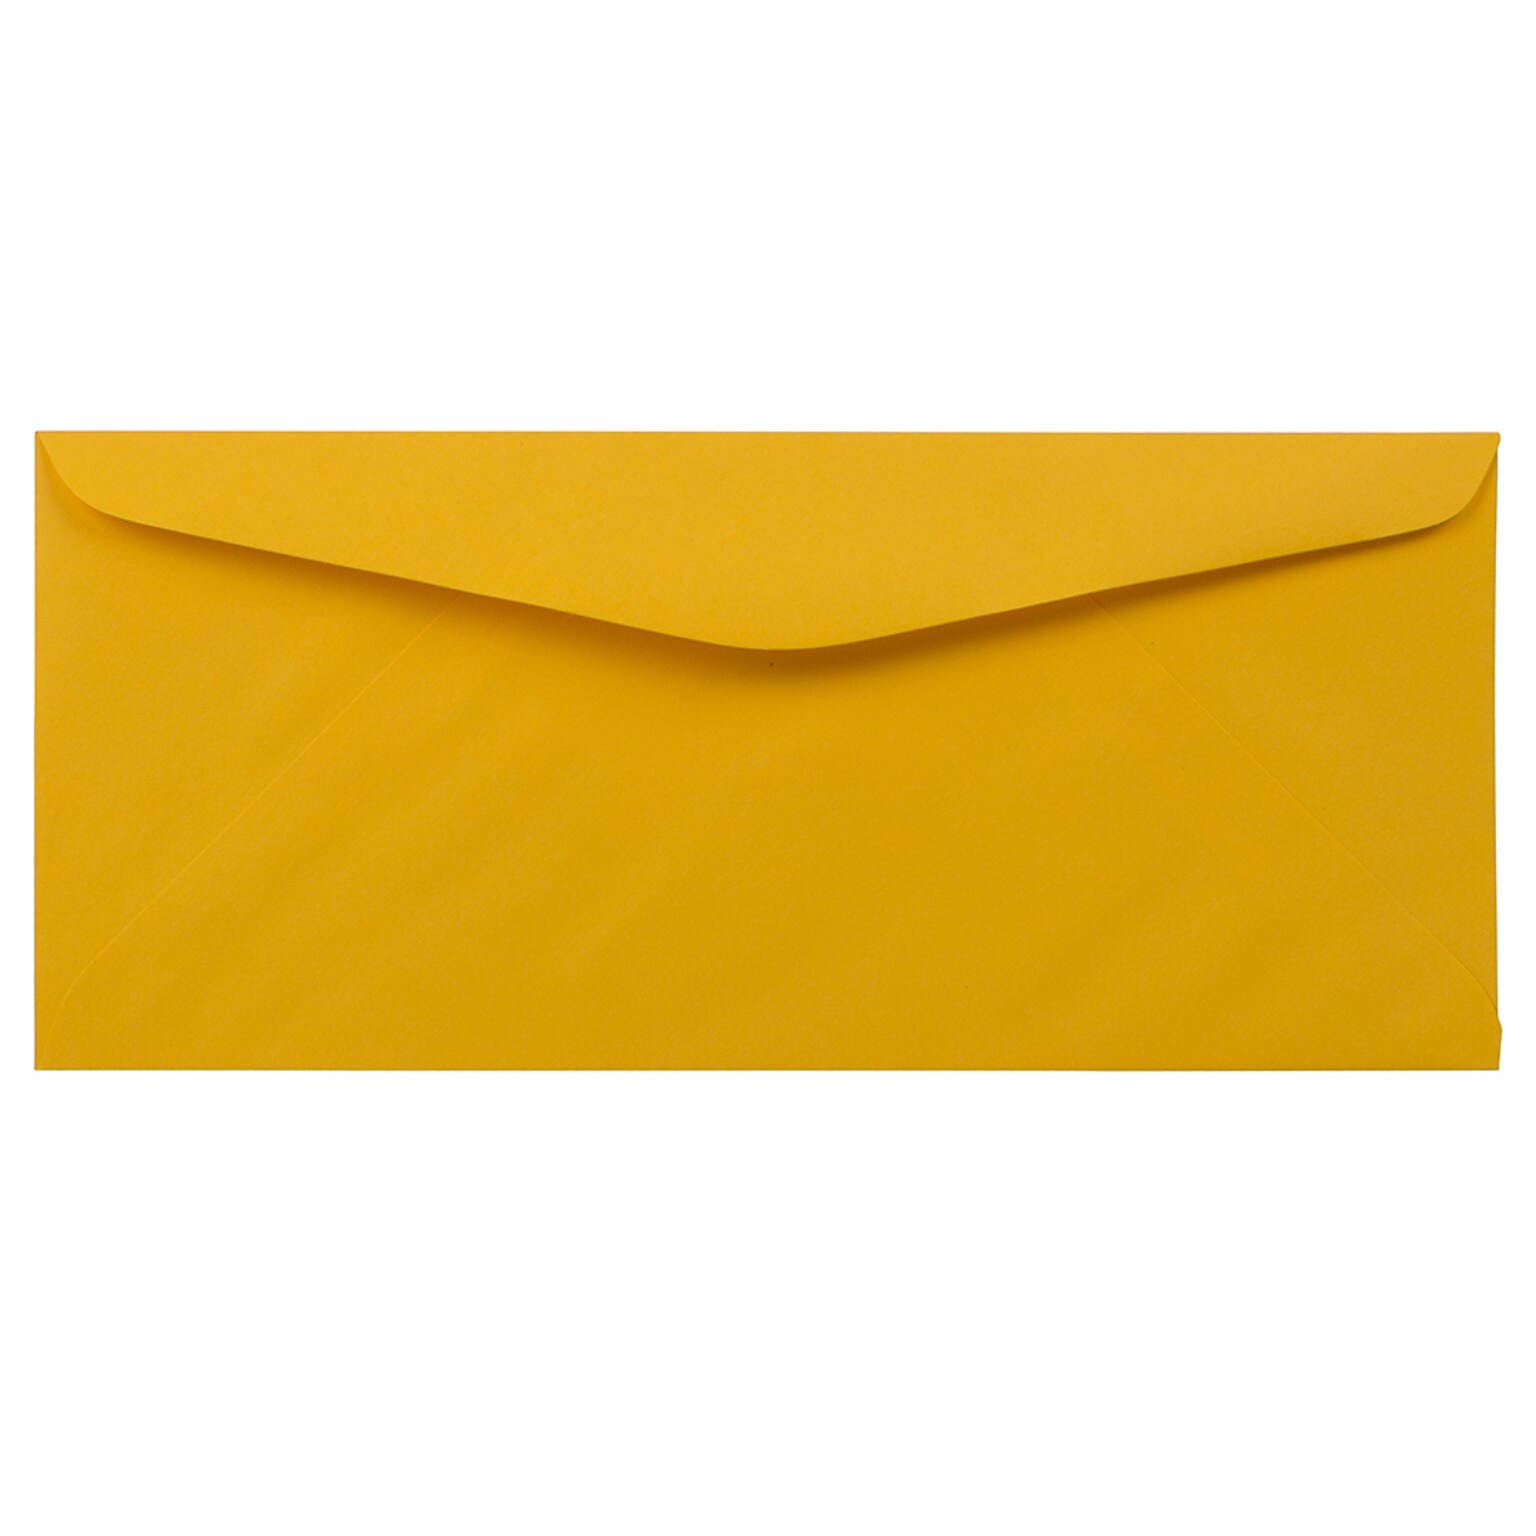 JAM Paper #9 Business Envelopes, 3 7/8 x 8 7/8, Gold Yellow, 50/Pack (1536427I)